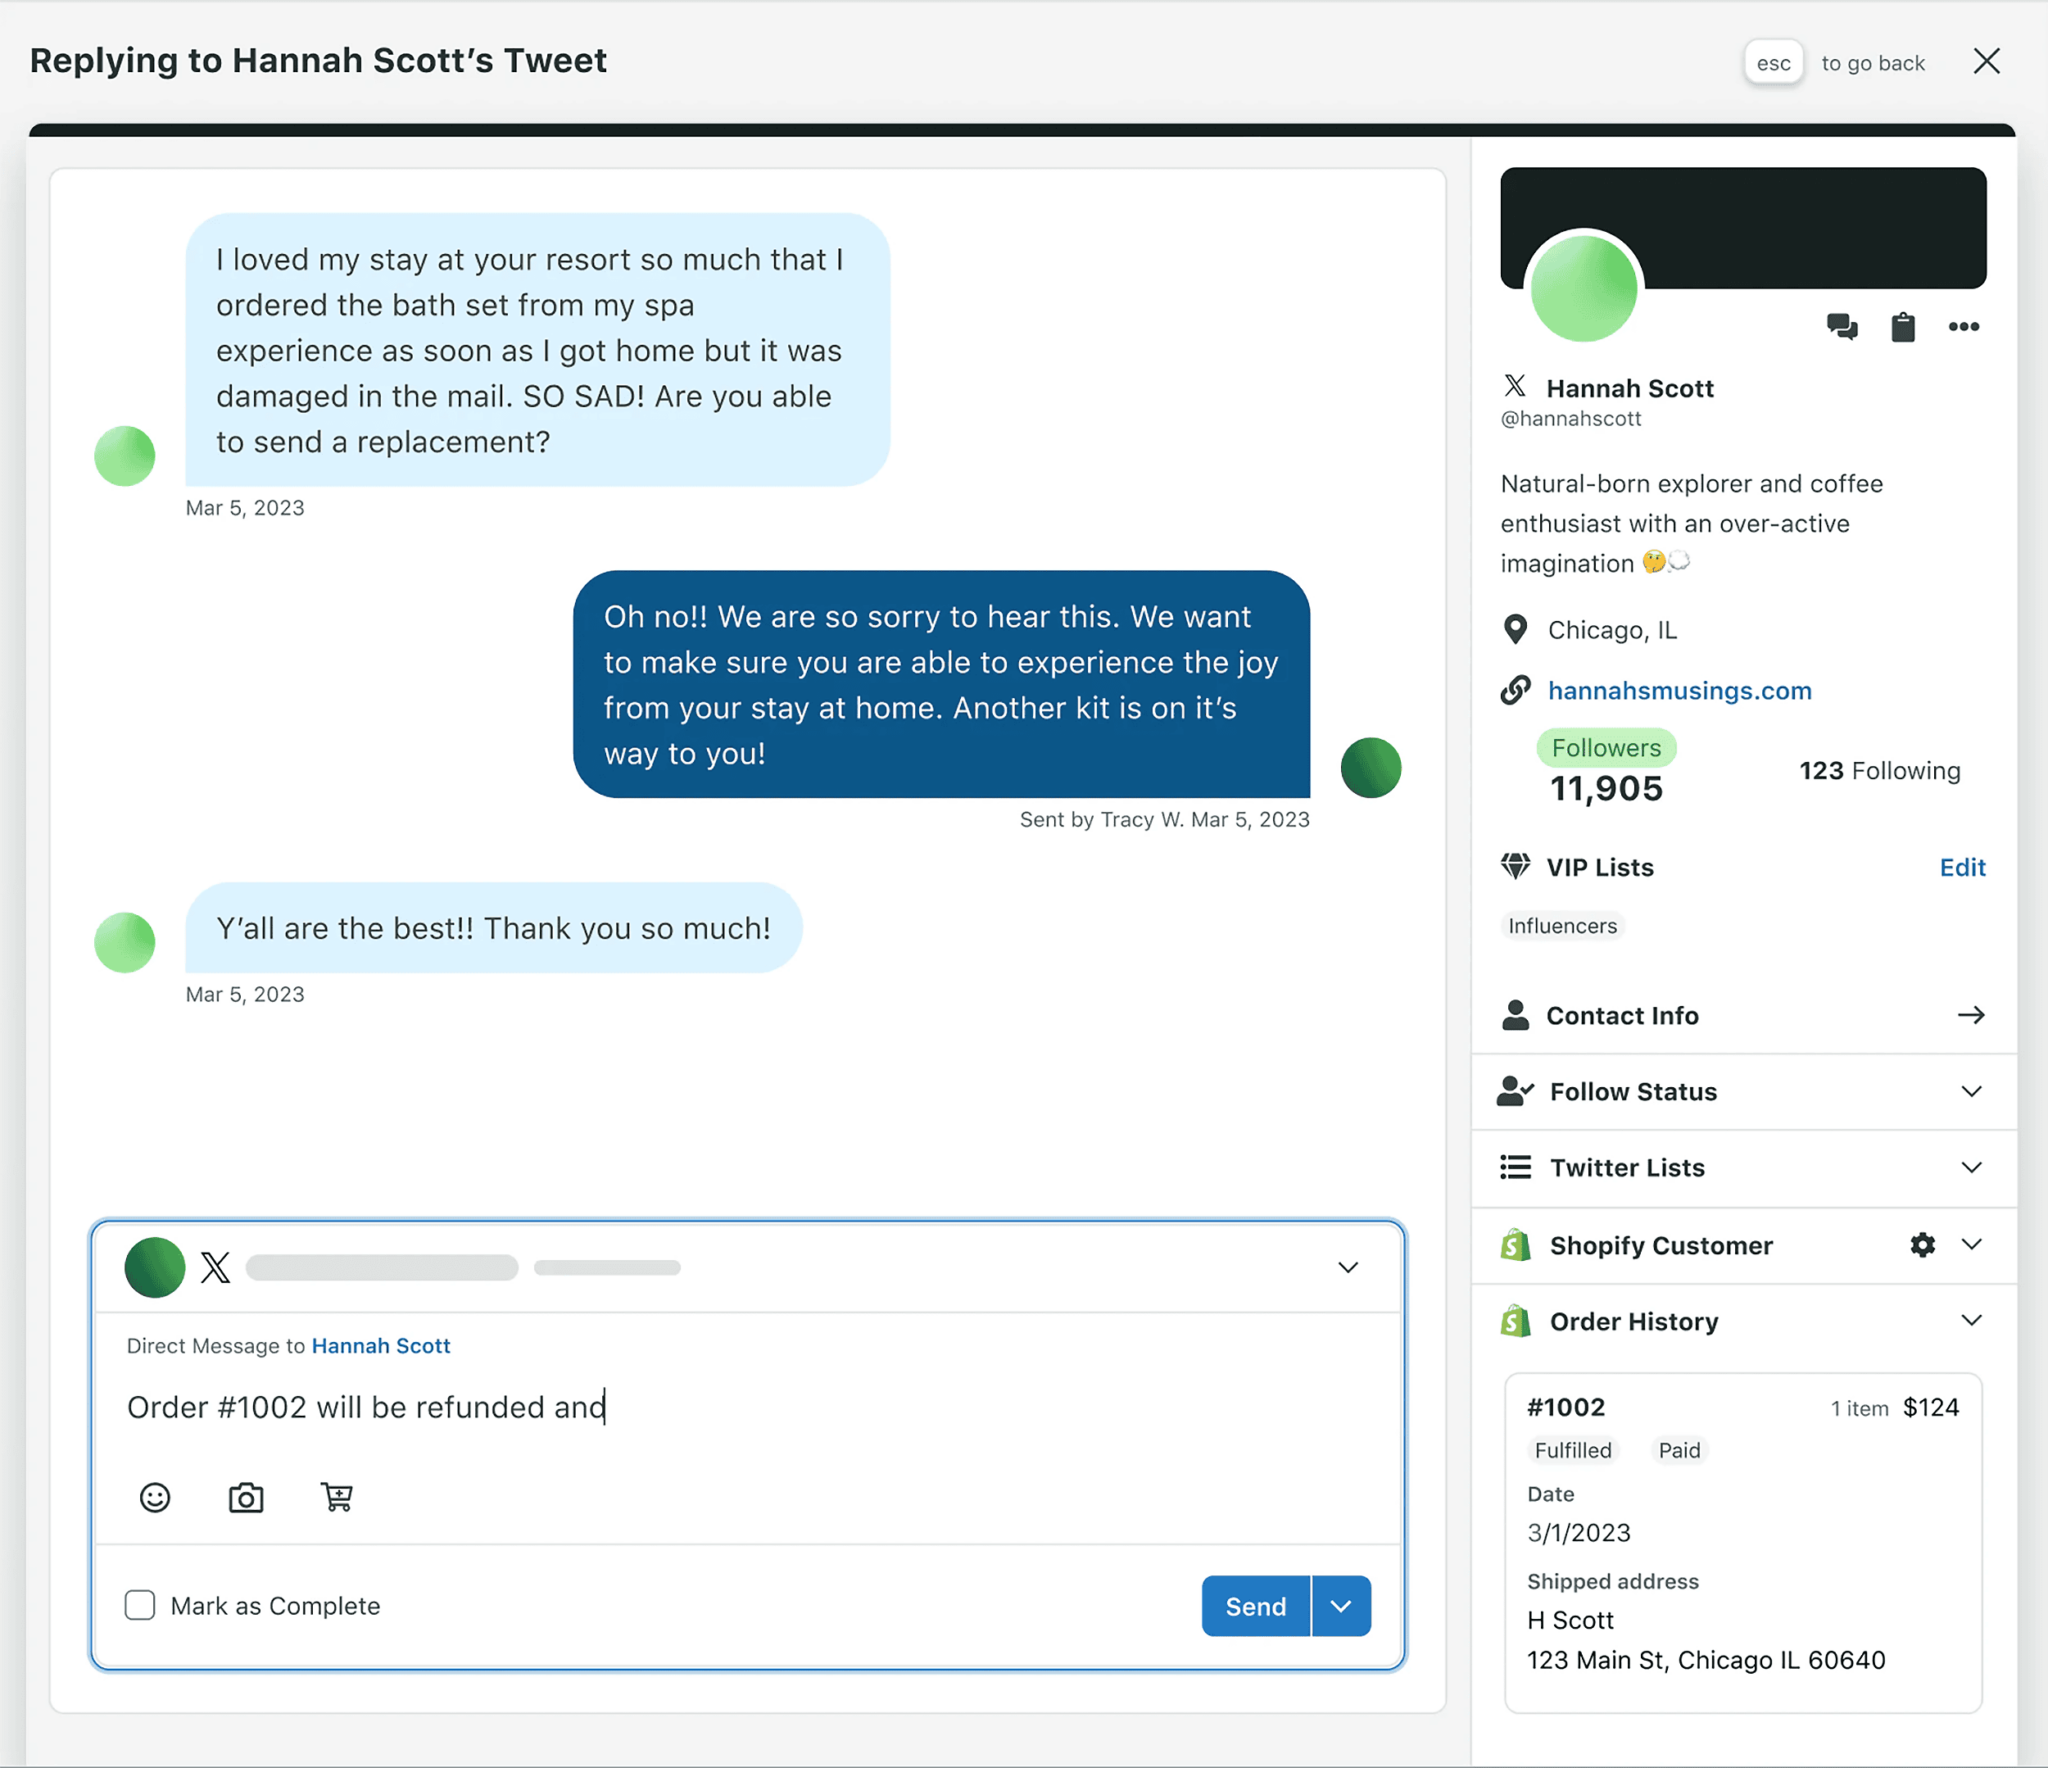 sproutsocial-messaging 29 Top Digital Marketing Tools for Every Budget